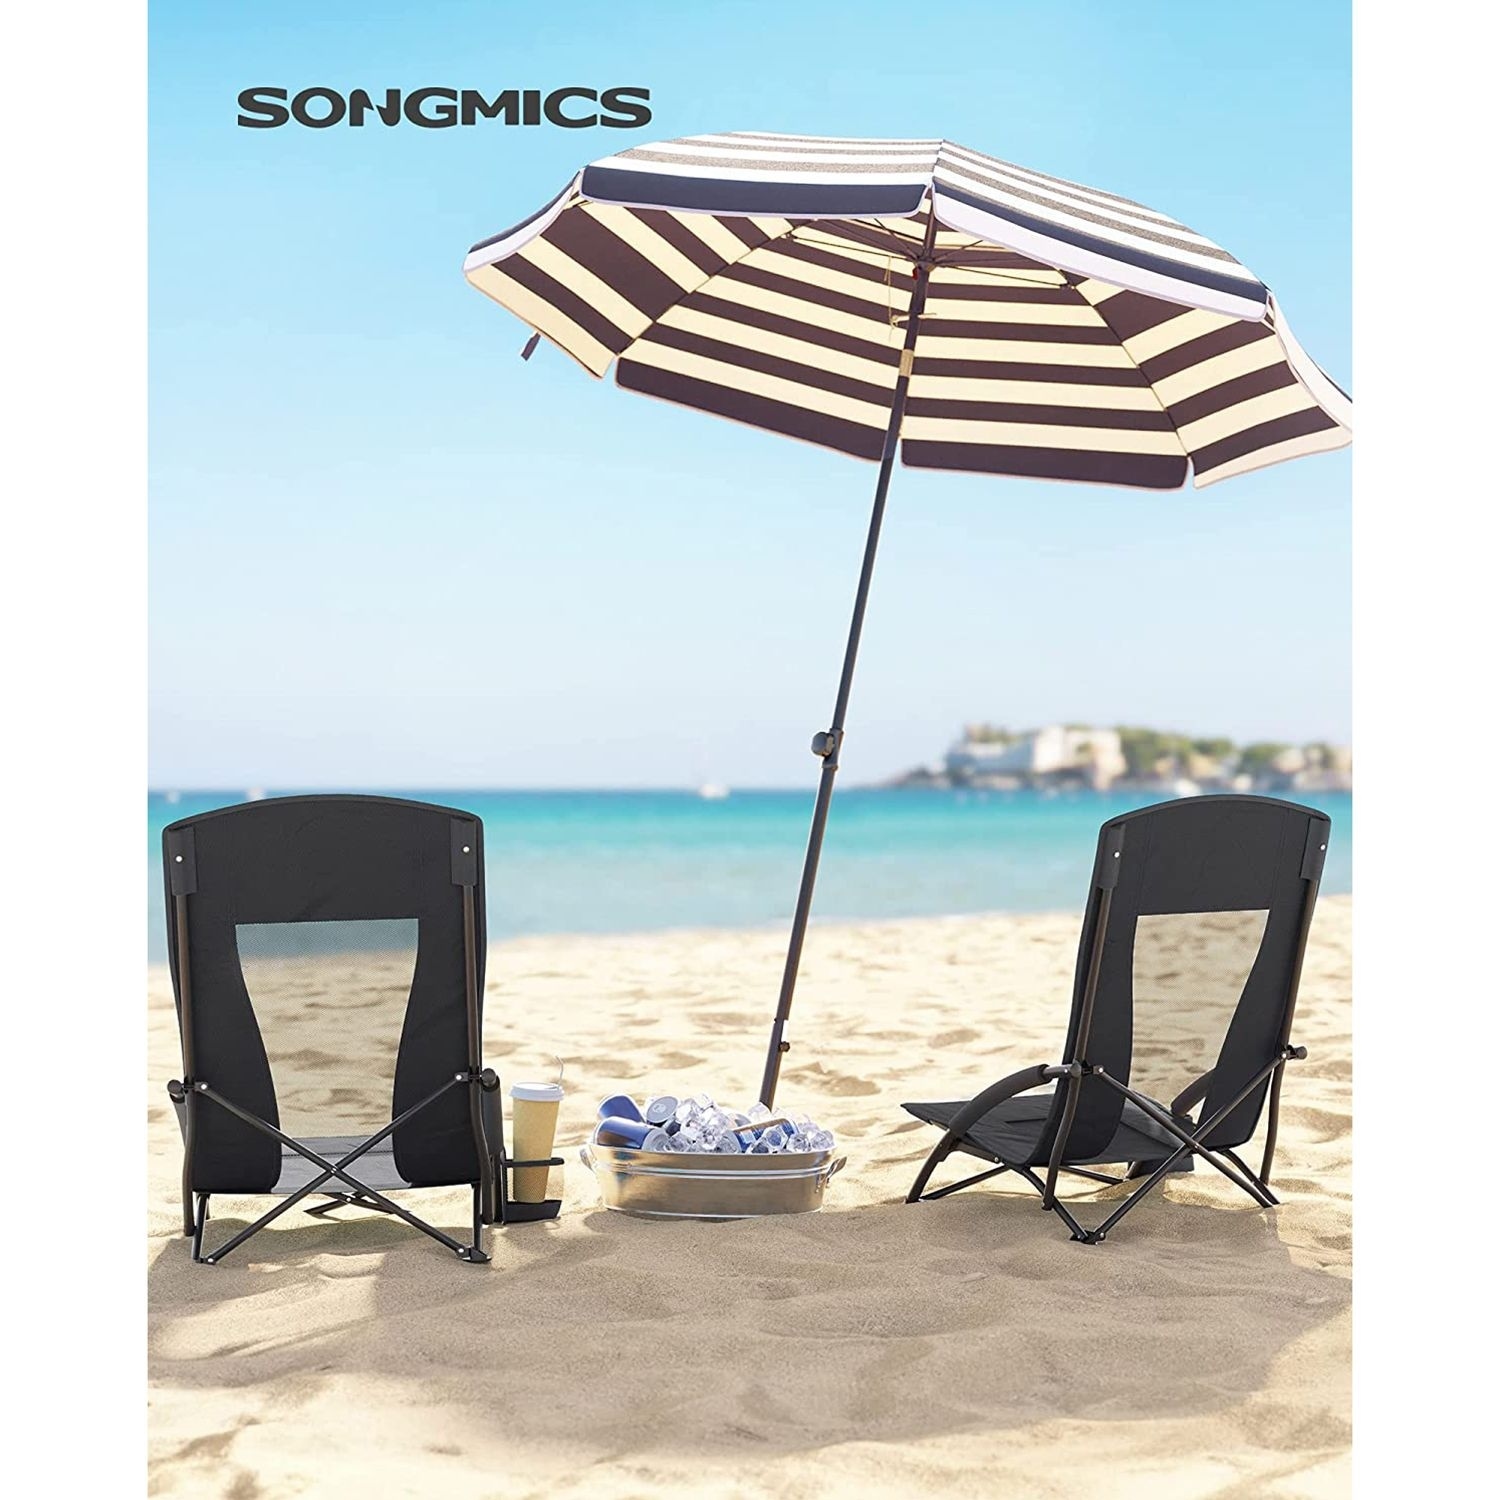 Portable Beach Chair, with High Backrest, Cup Holder, Foldable